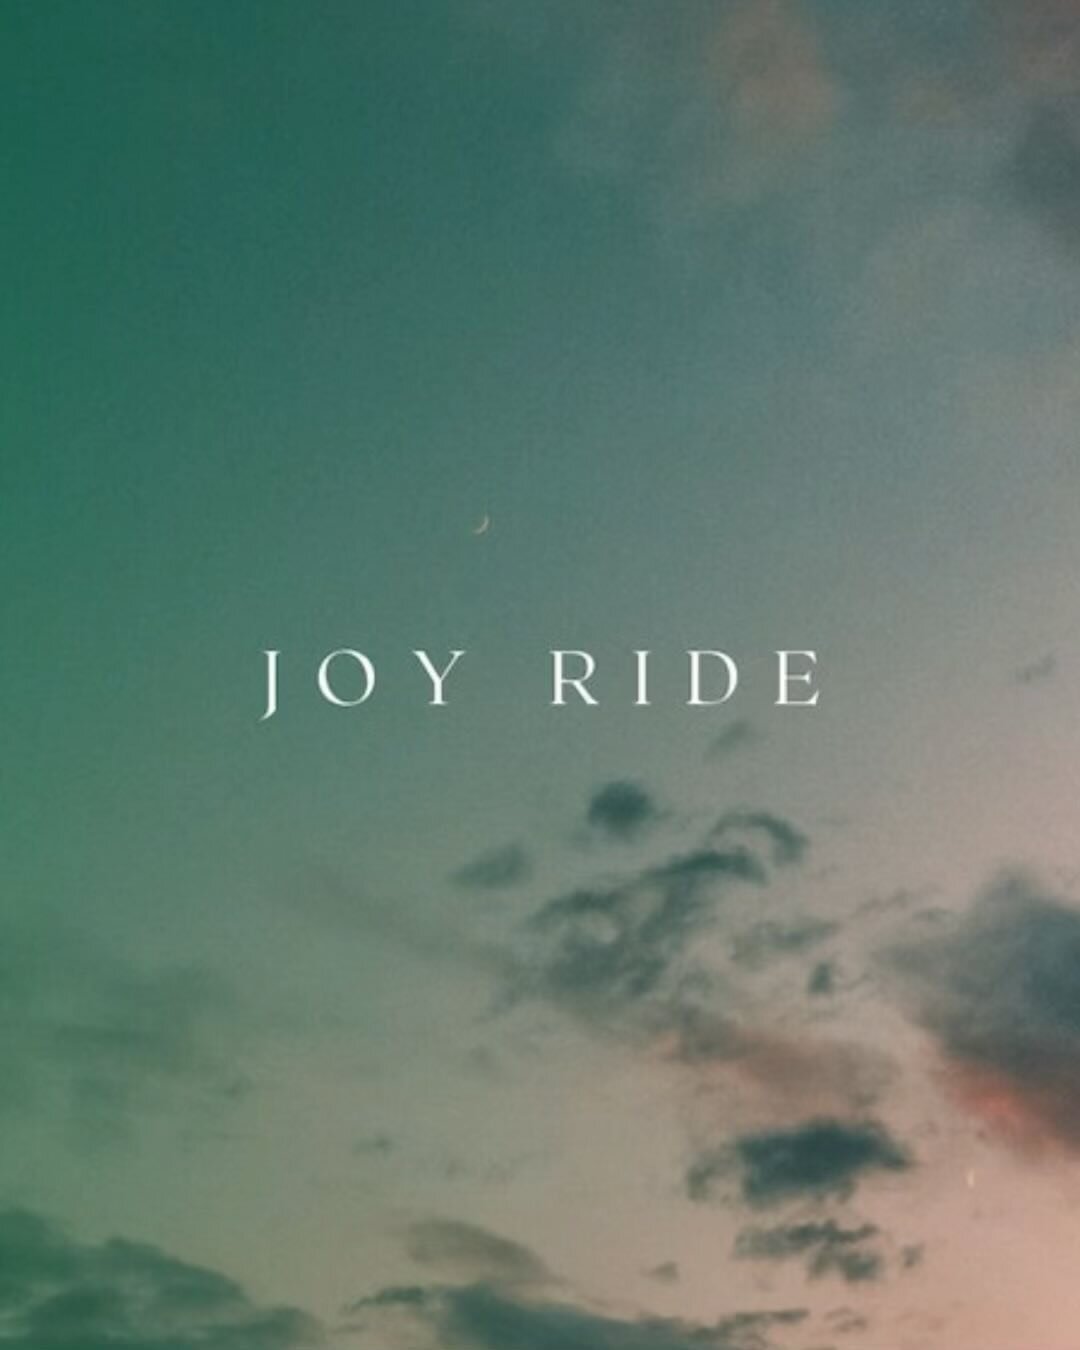 🌿✨JOY RIDE✨🌿 out everywhere! 💿 
This one rounds out the final piece of the musical story I&rsquo;ve been telling you all this year. It&rsquo;s one near and dear to my heart&hellip; reflective of isolated times and finding joy in the little things.